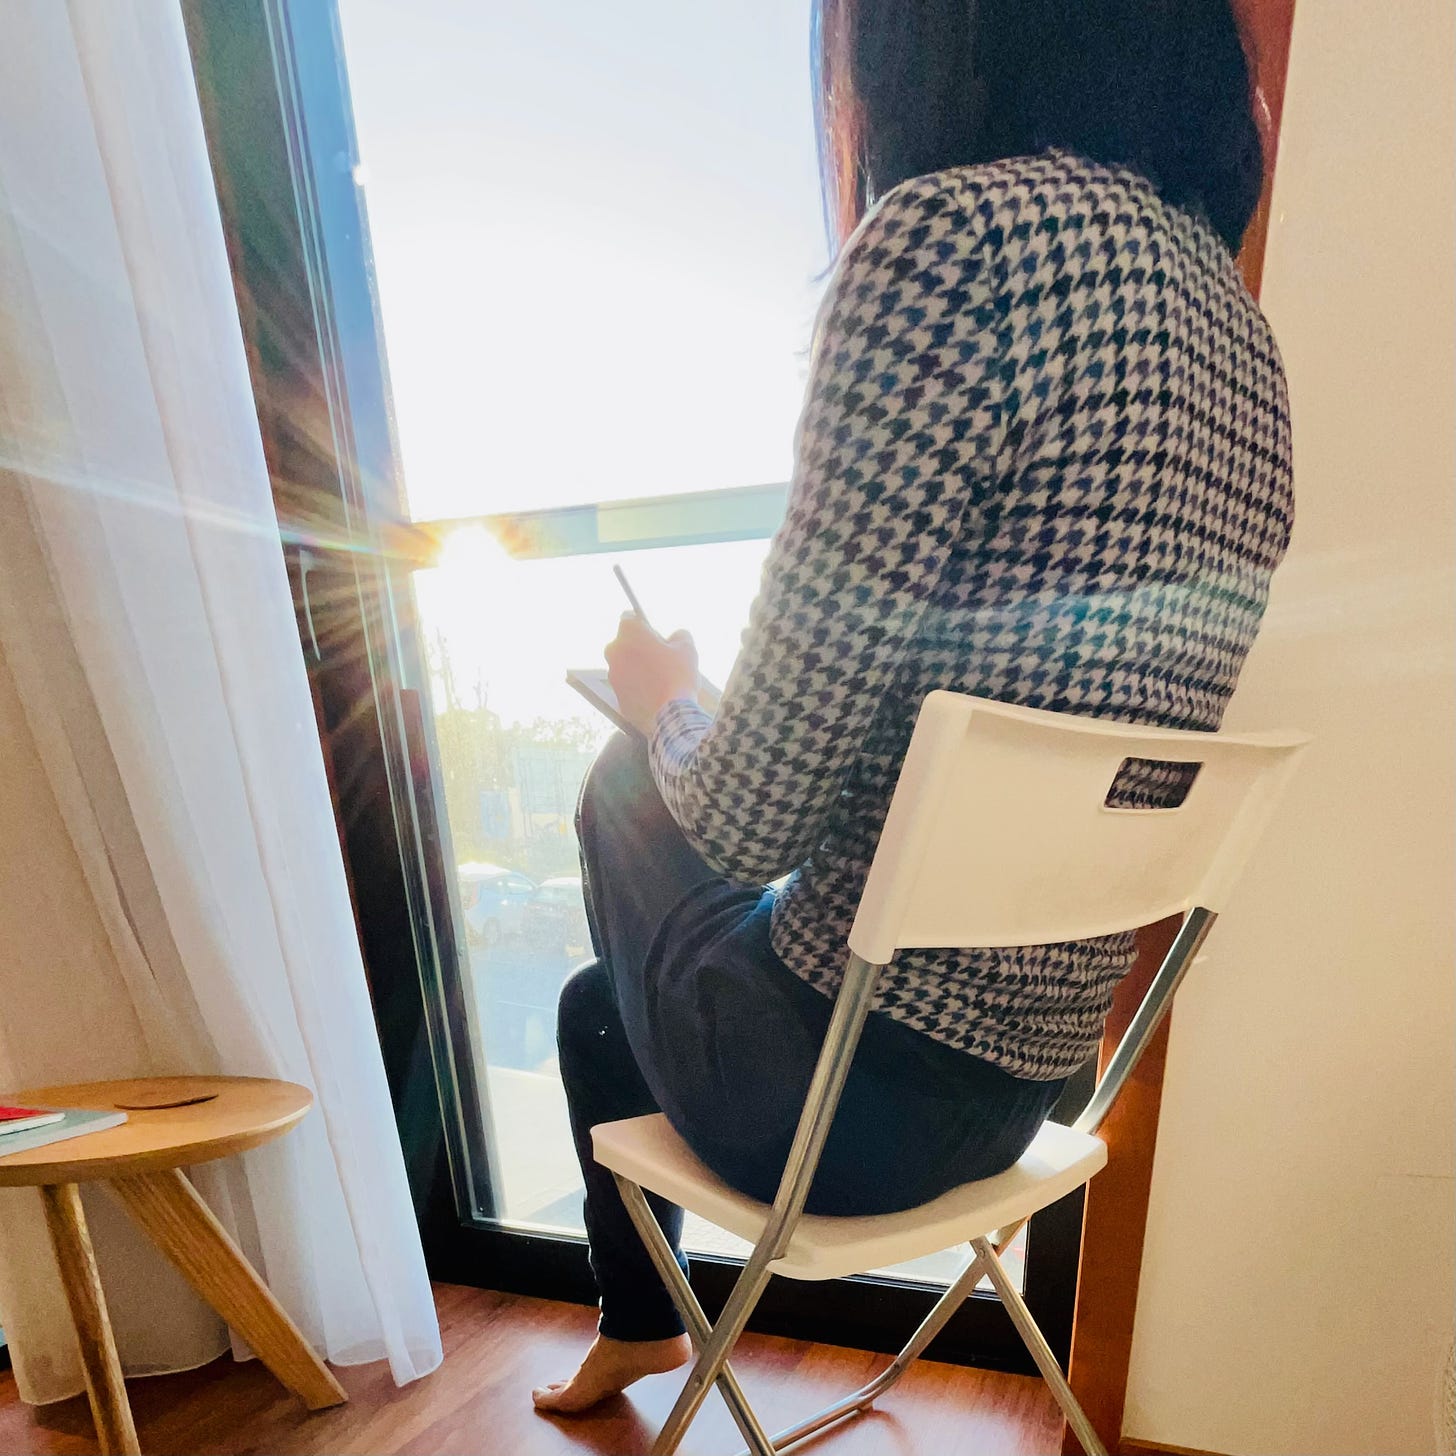 image: a lady sitting on a chair, facing the window, painting, The sun ray is bursting through the window. photo by melinda yeoh